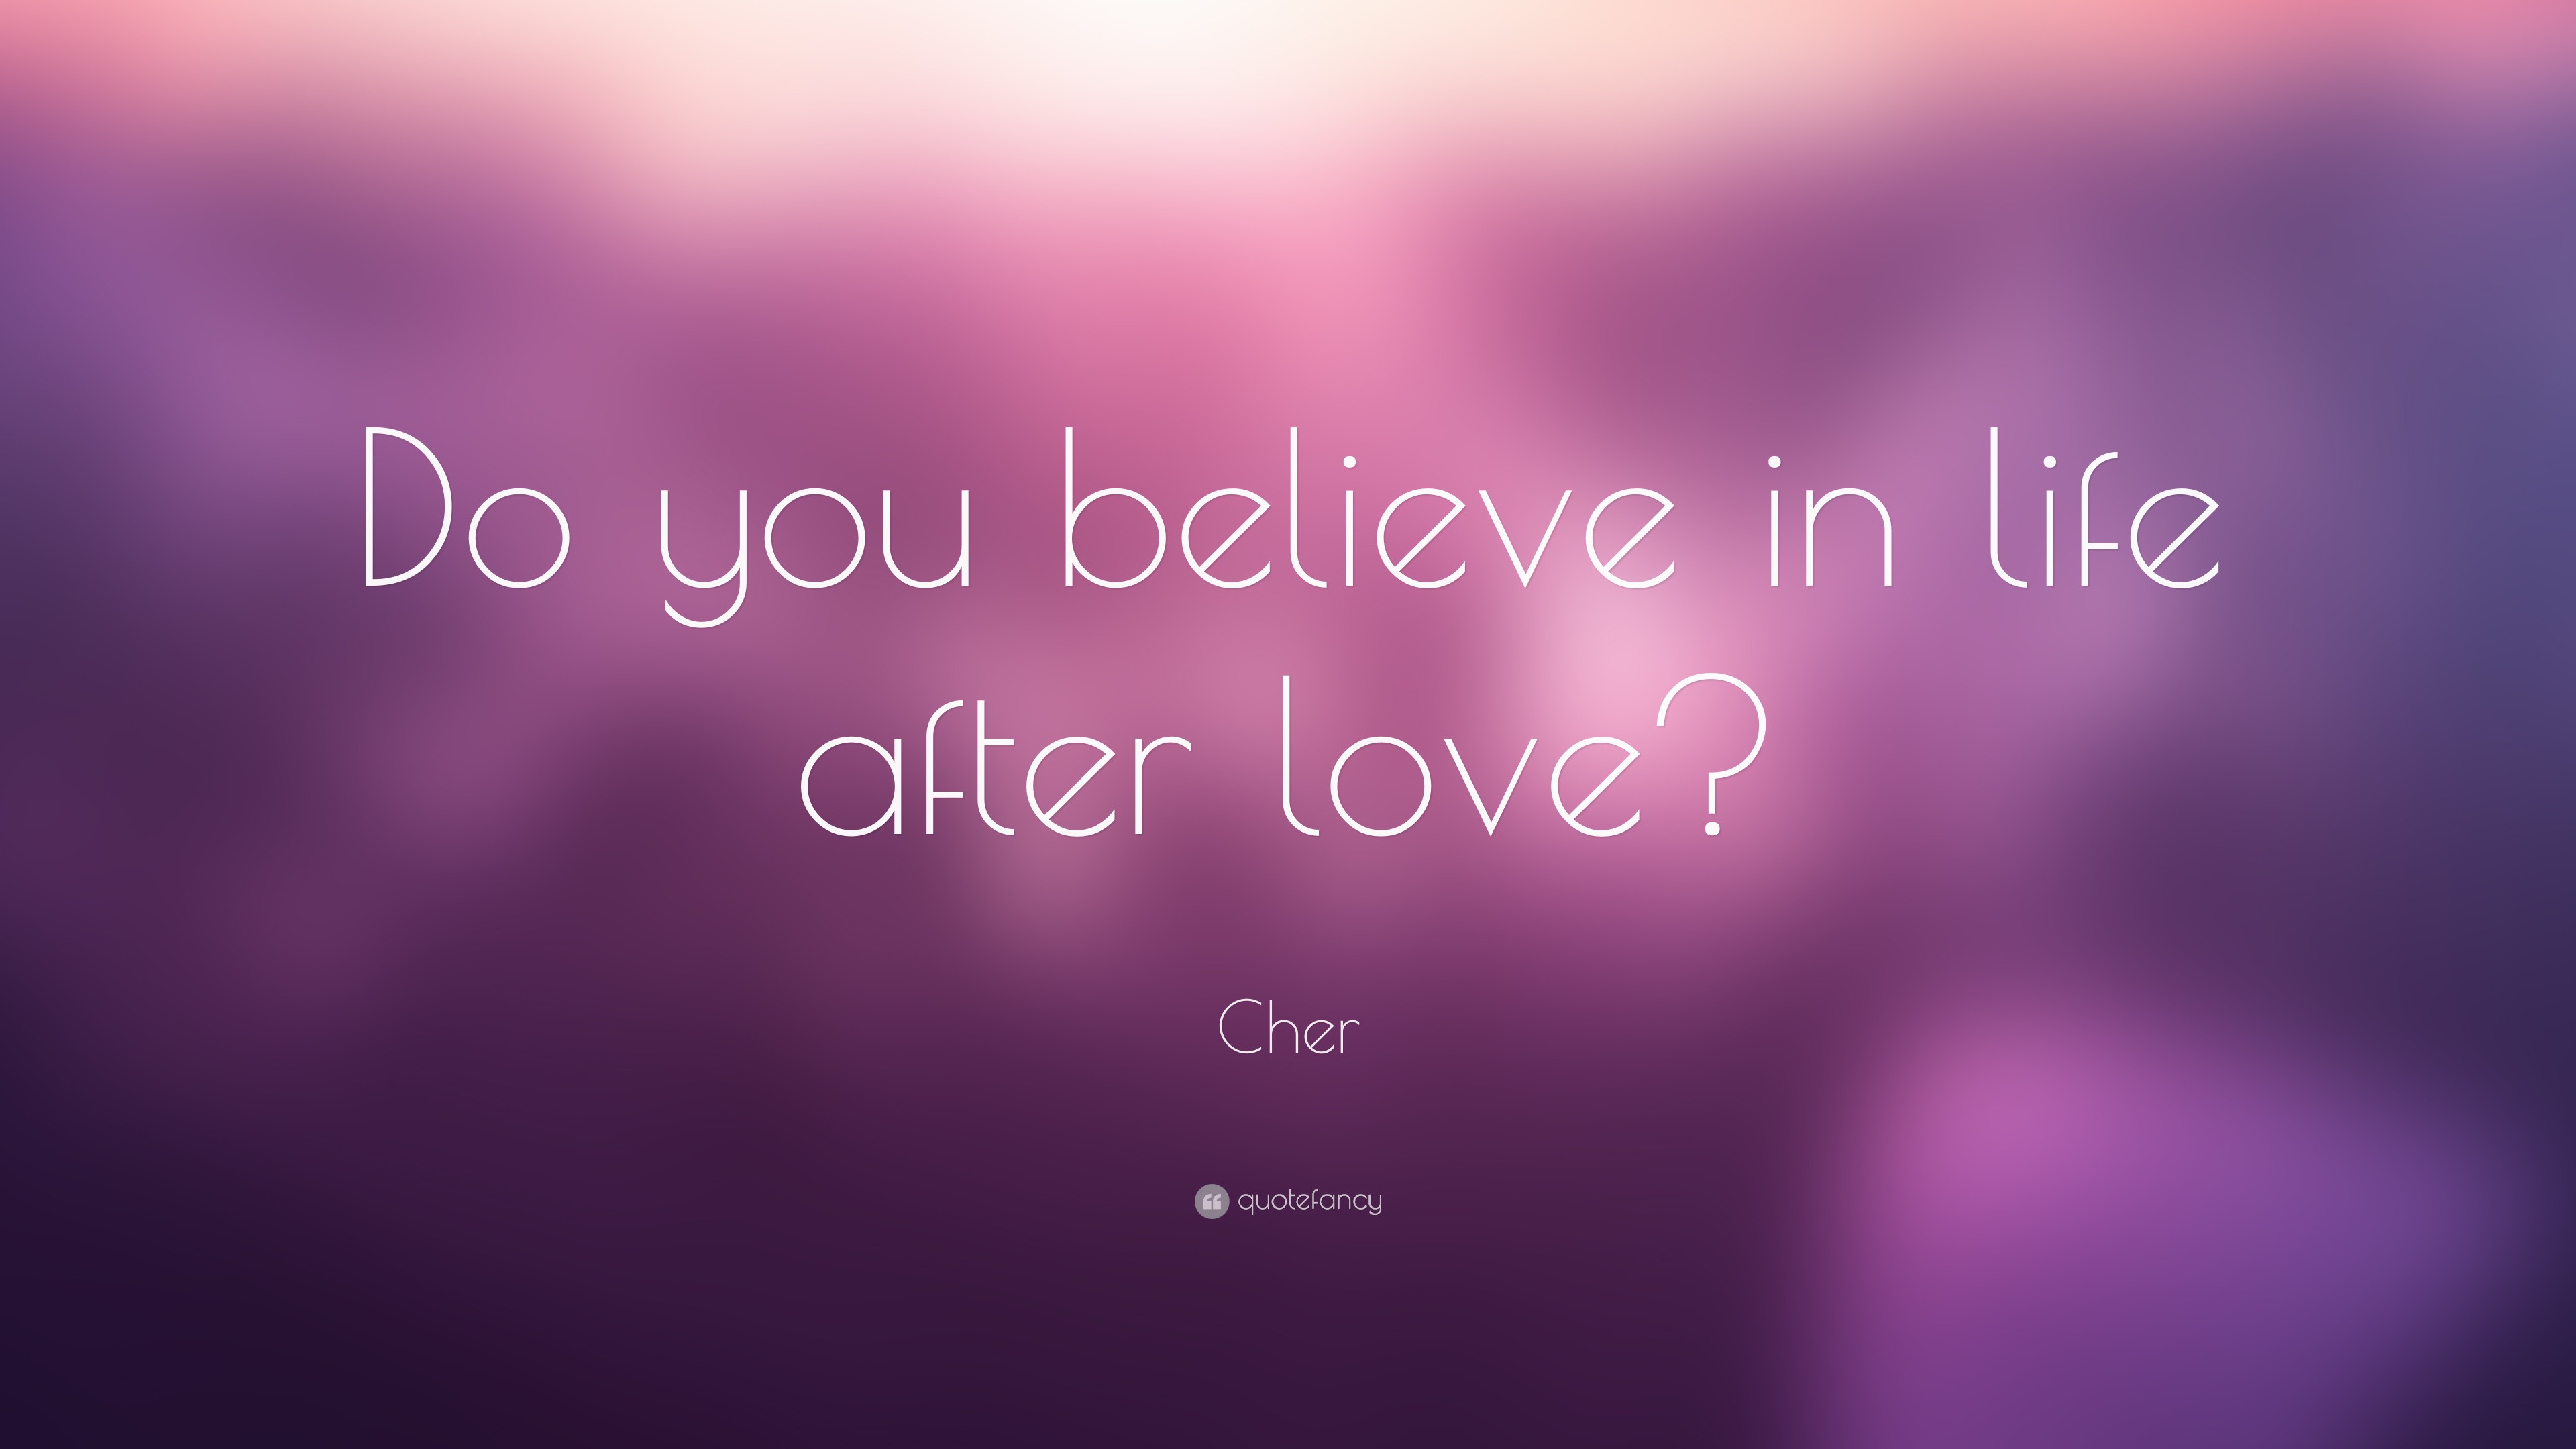 Cher Quote “Do you believe in life after love?”